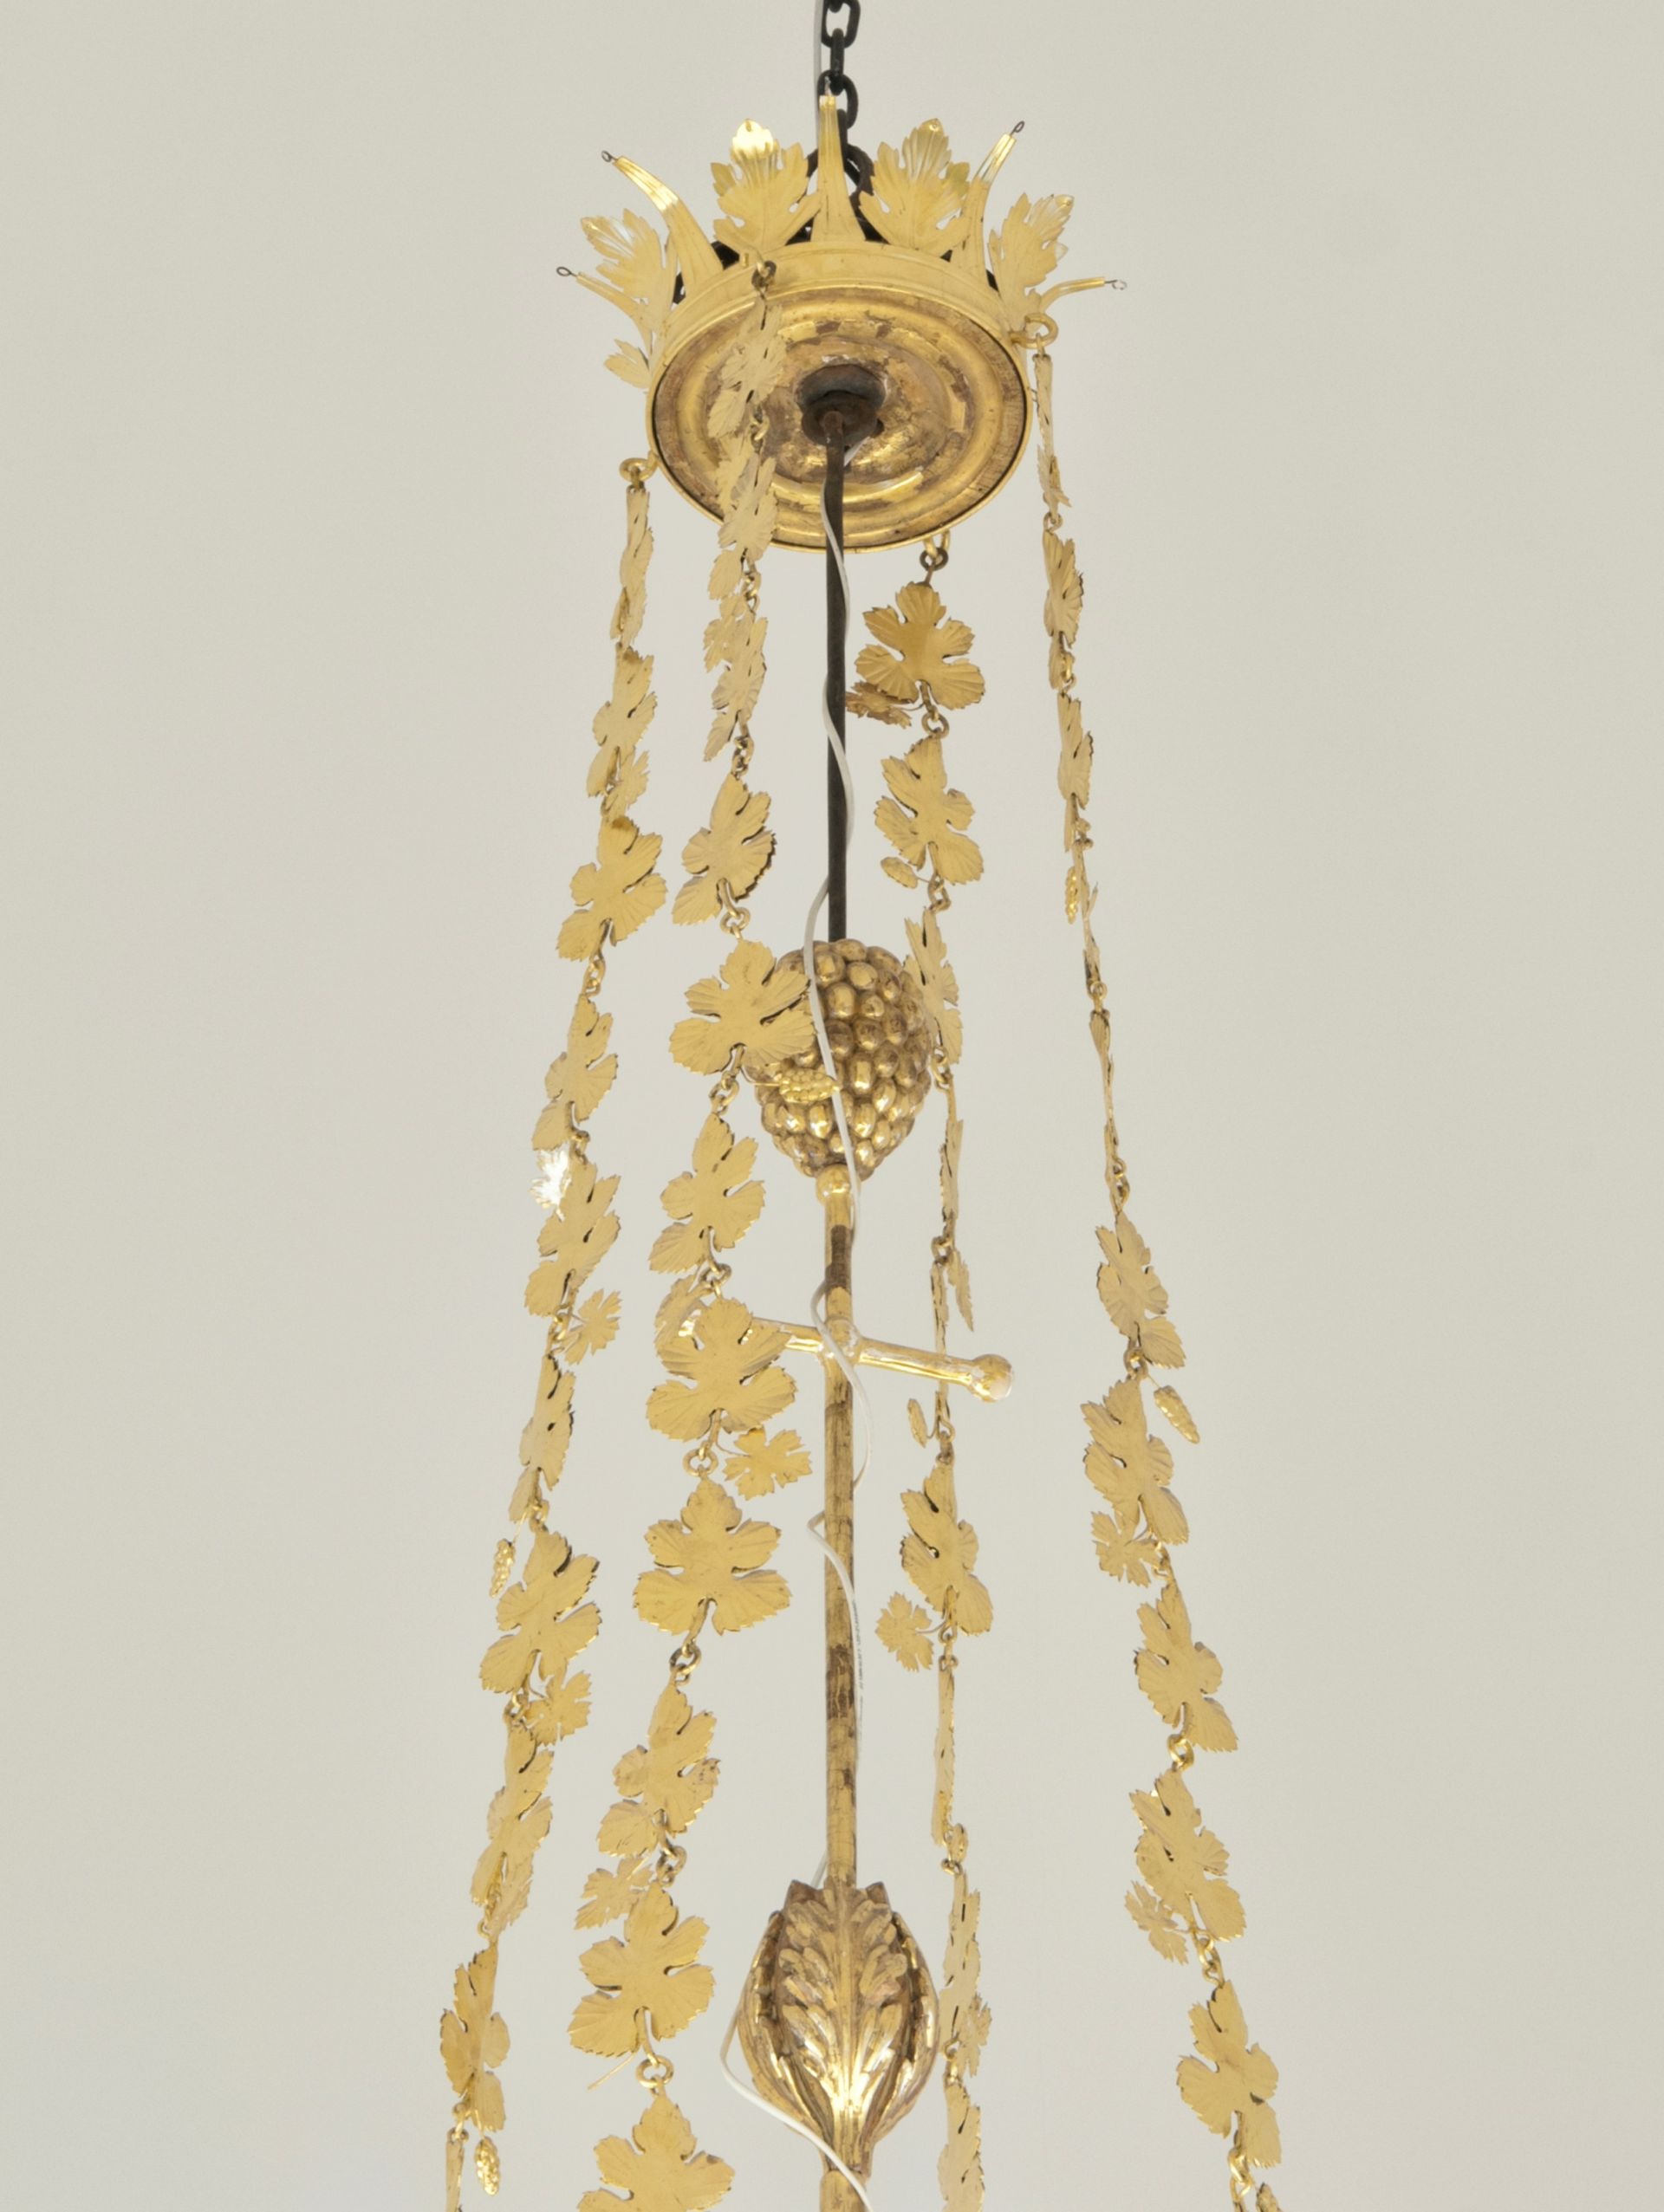 Fragment of chandelier, 1787–1803, Lithuanian National Museum of Art, TM-521. Photo by Paulius Makauskas, 2017